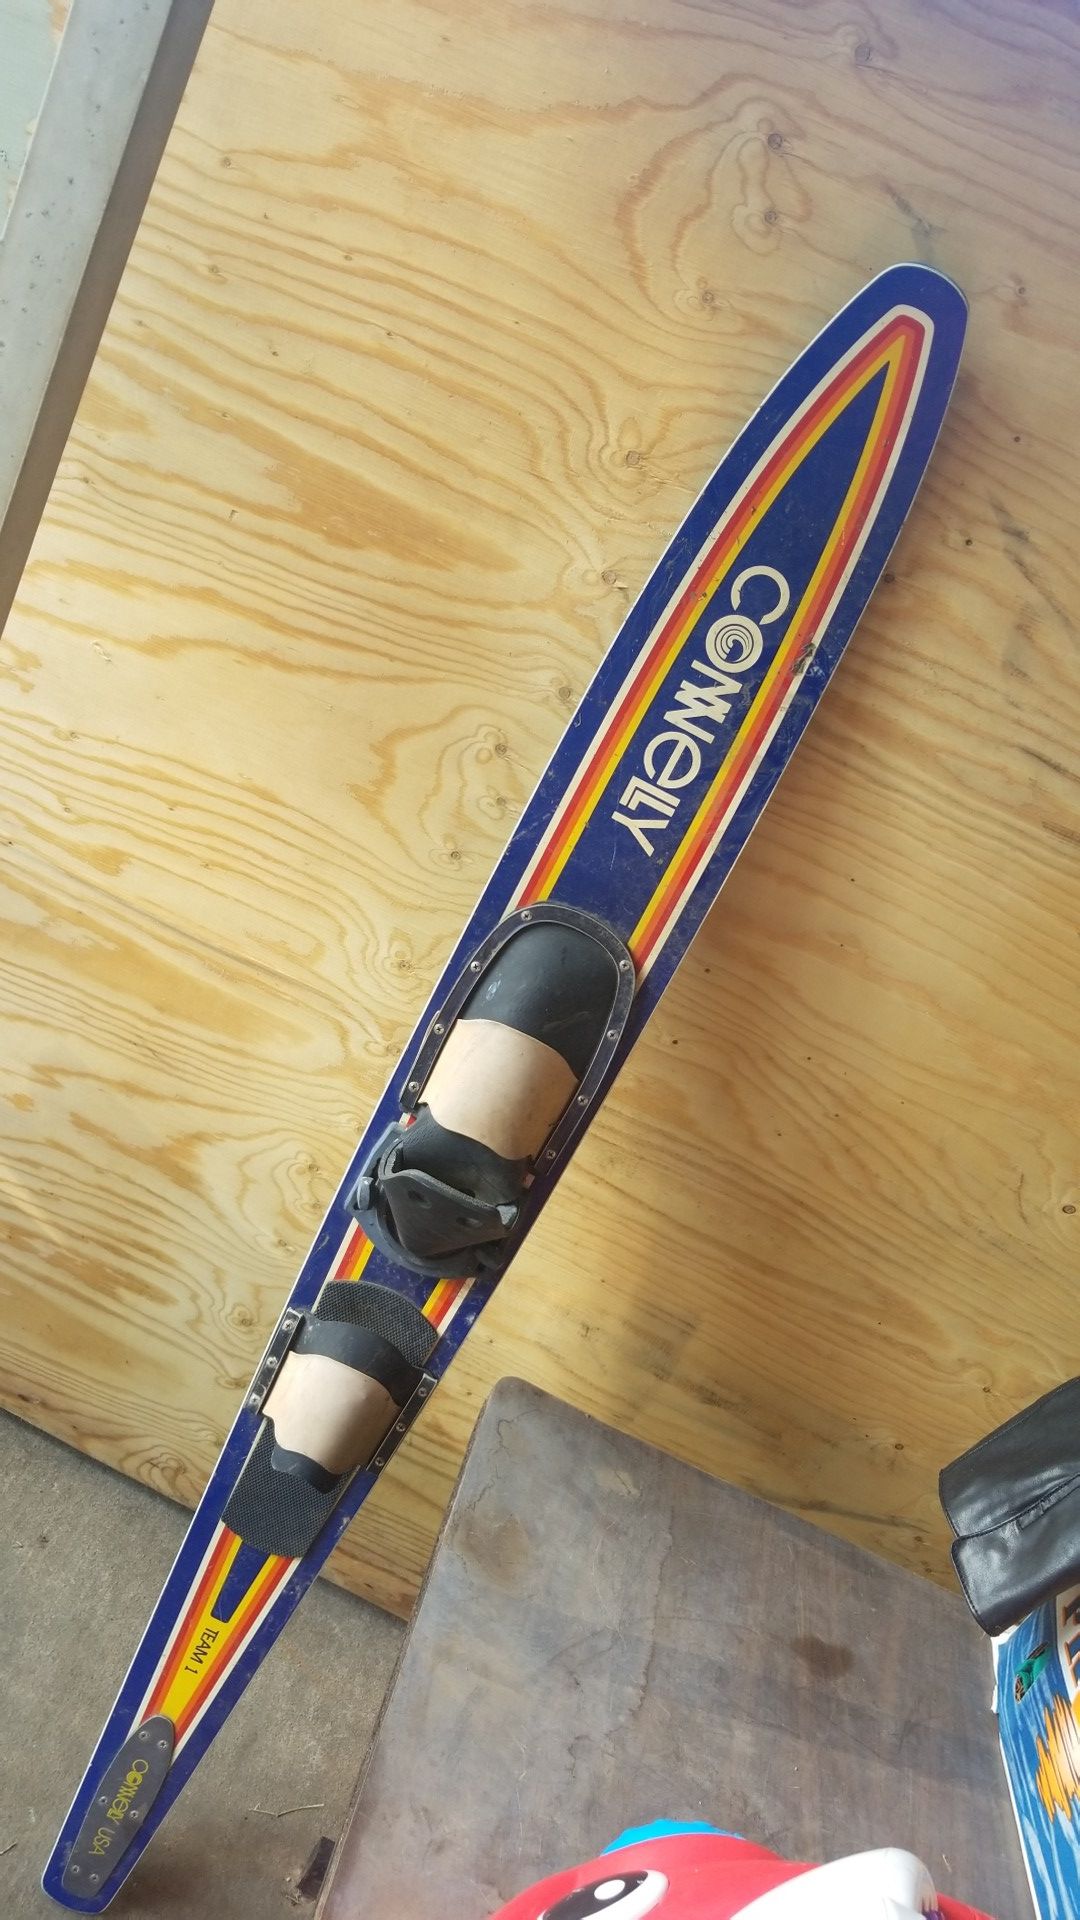 Pair of obrien master combos double skis and a connelly slalom ski team 1